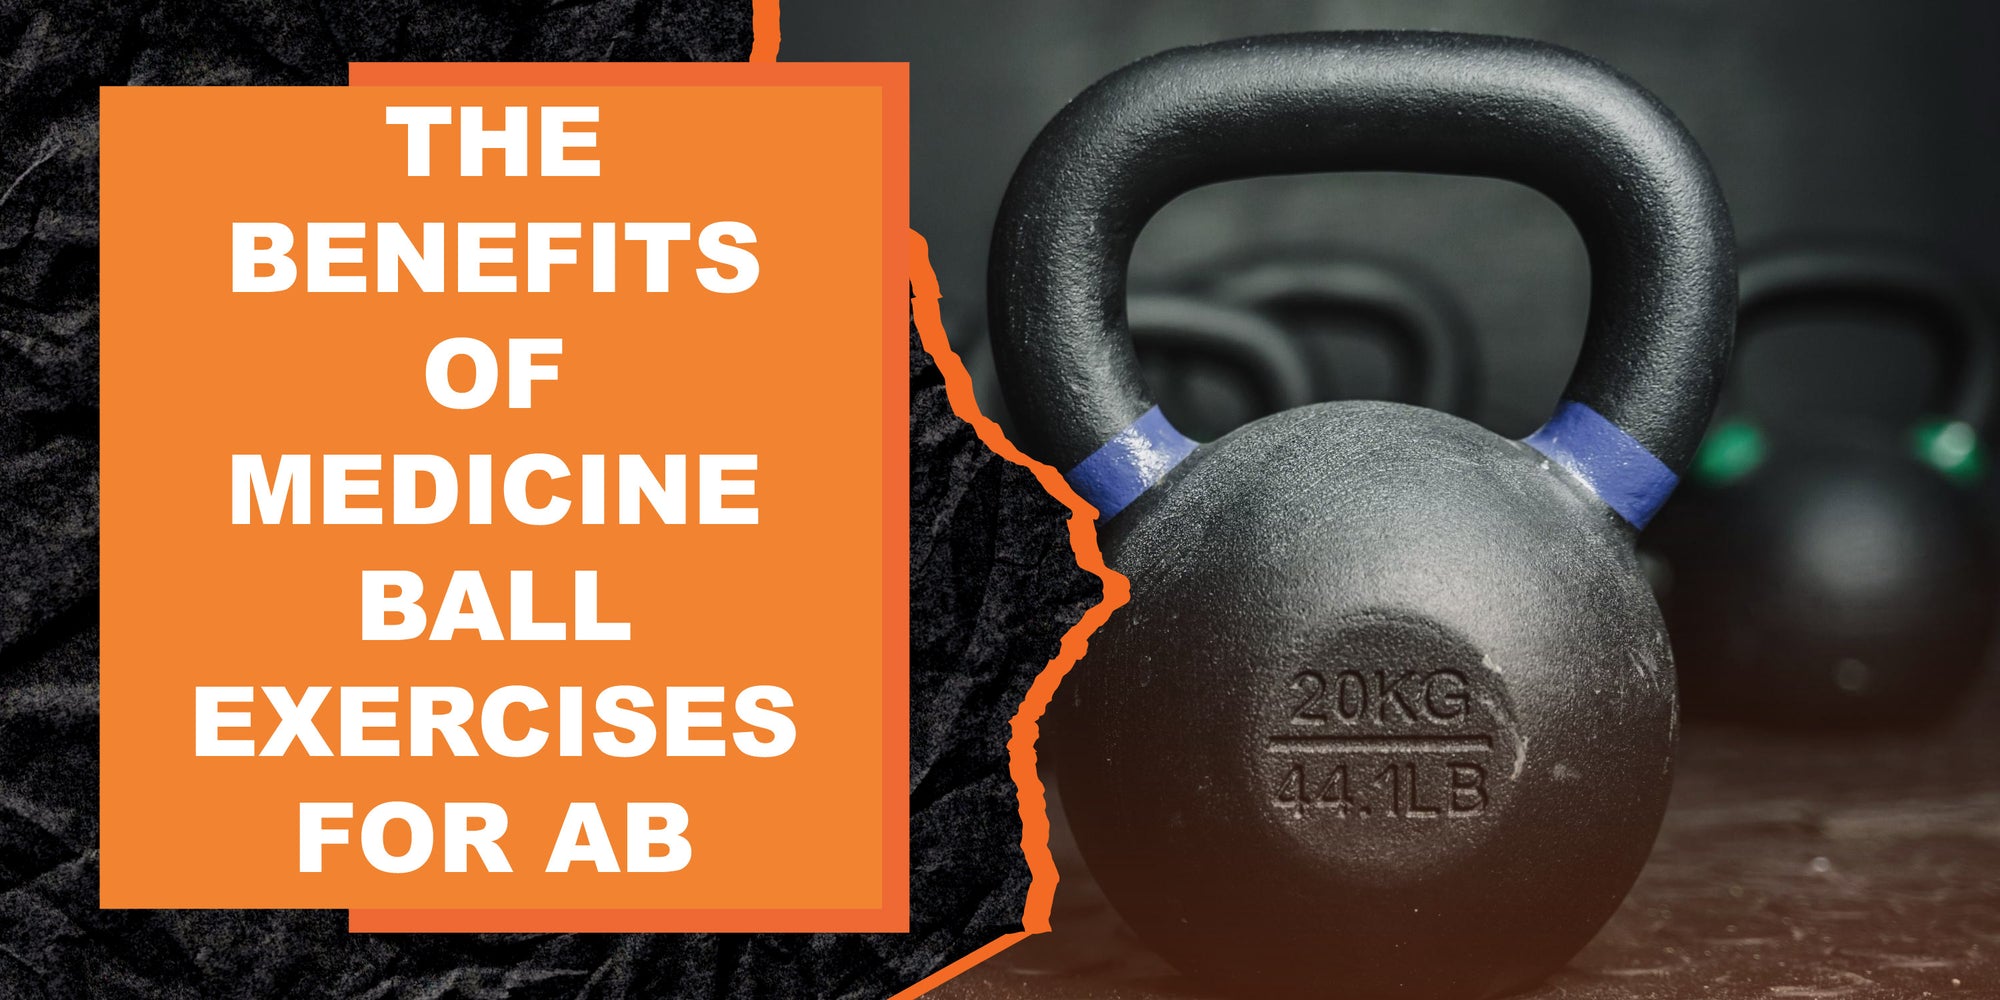 The Benefits of Medicine Ball Exercises for Ab Workouts